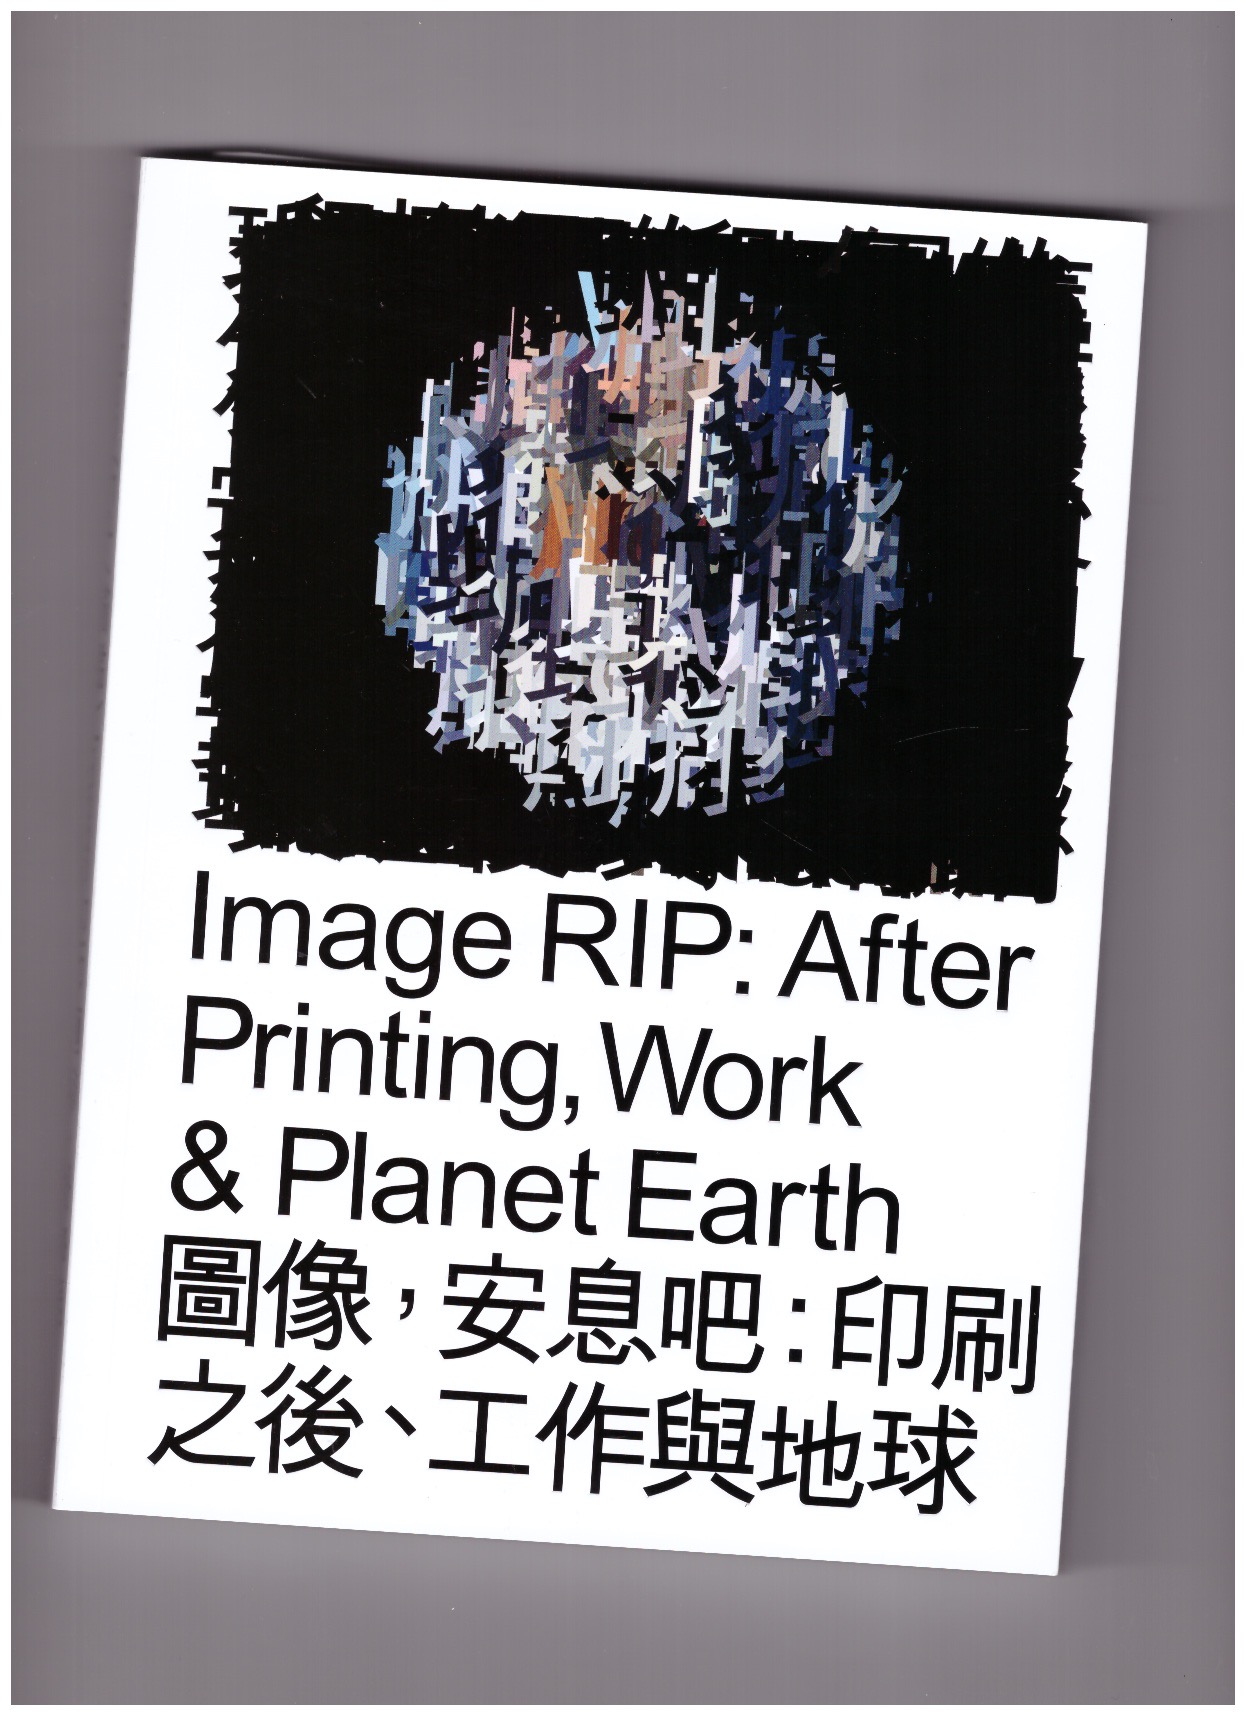 HAN, Geoff - Image RIP: After Printing, Work & Planet Earth